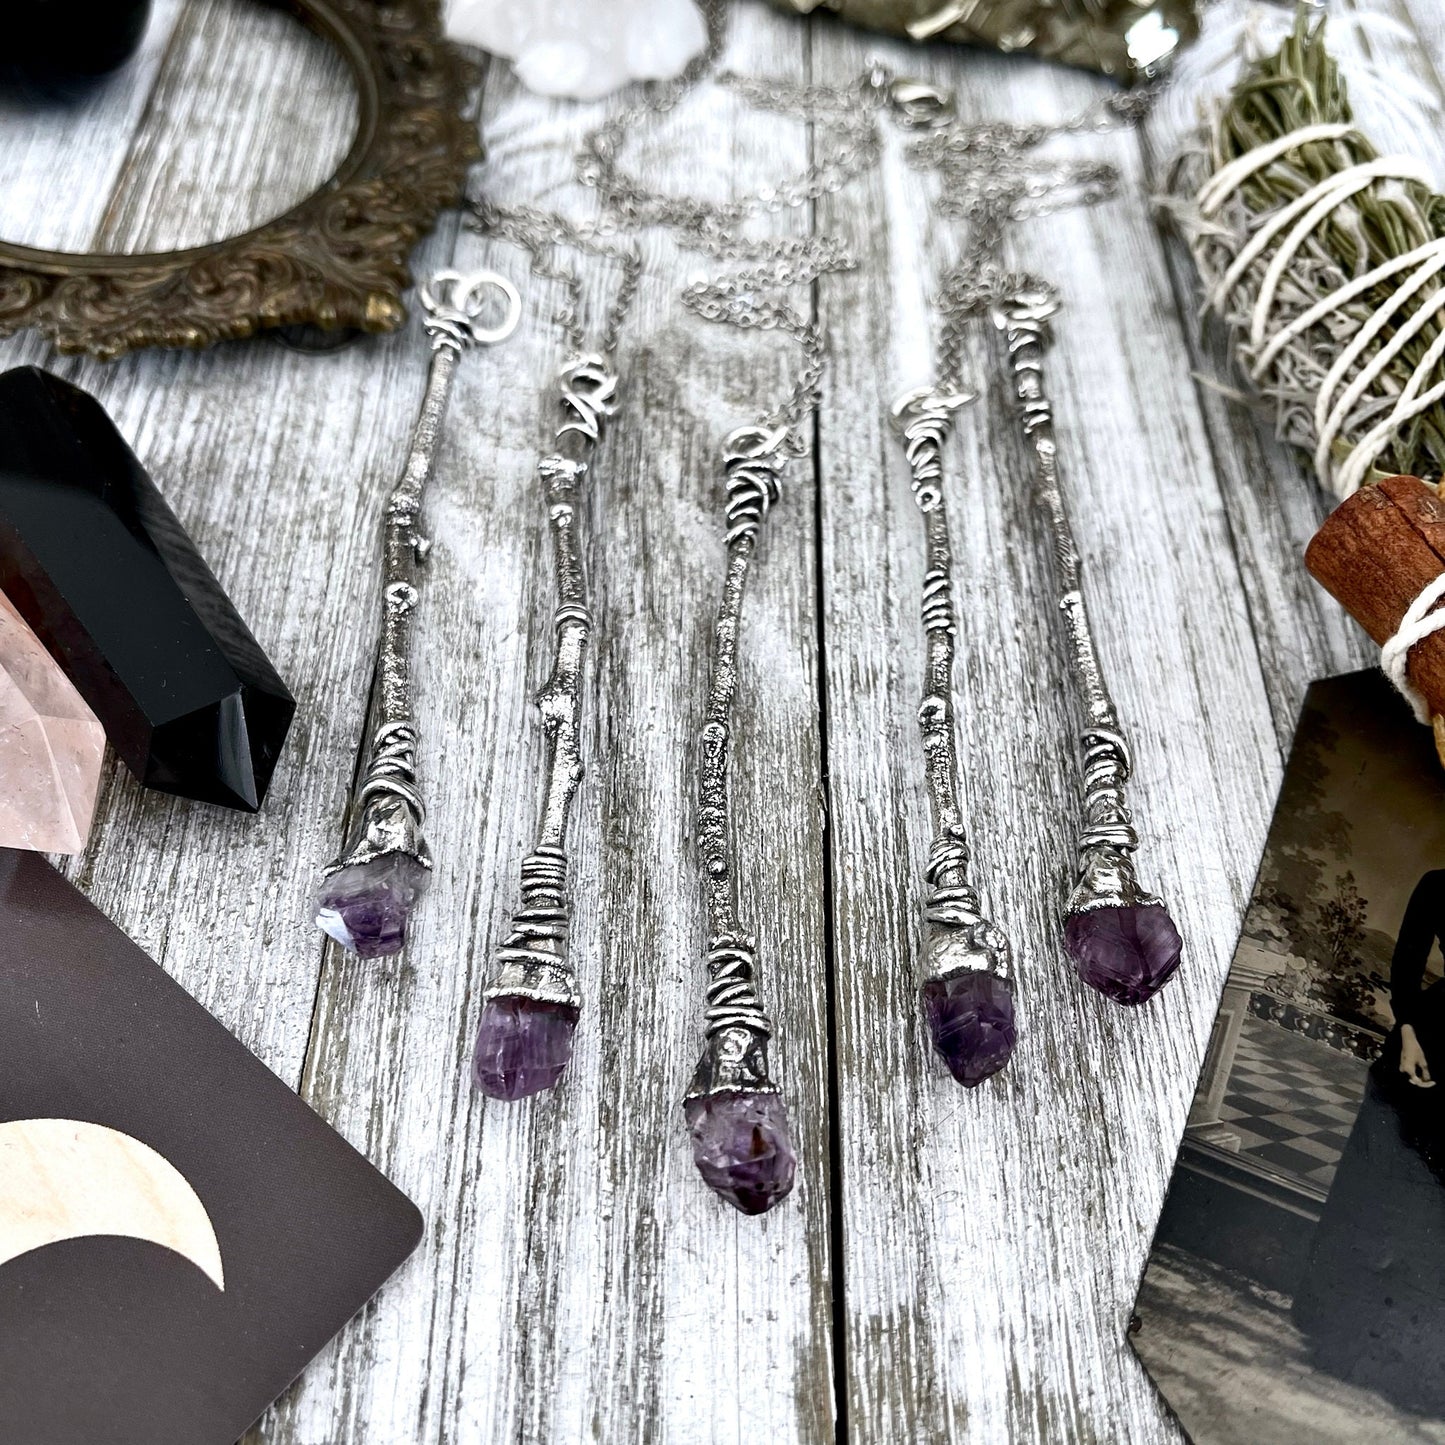 Clear Quartz Jewelry, Crystal Necklaces, Crystal Wand, Crystal Wizard Wand, electroformed, Etsy ID: 1587040348, FOXLARK- NECKLACES, Gothic Jewelry, Halloween Jewelry, Jewelry, Necklaces, Raw Amethyst, Raw Crystal Jewelry, Raw Crystal Necklace, Raw Quartz